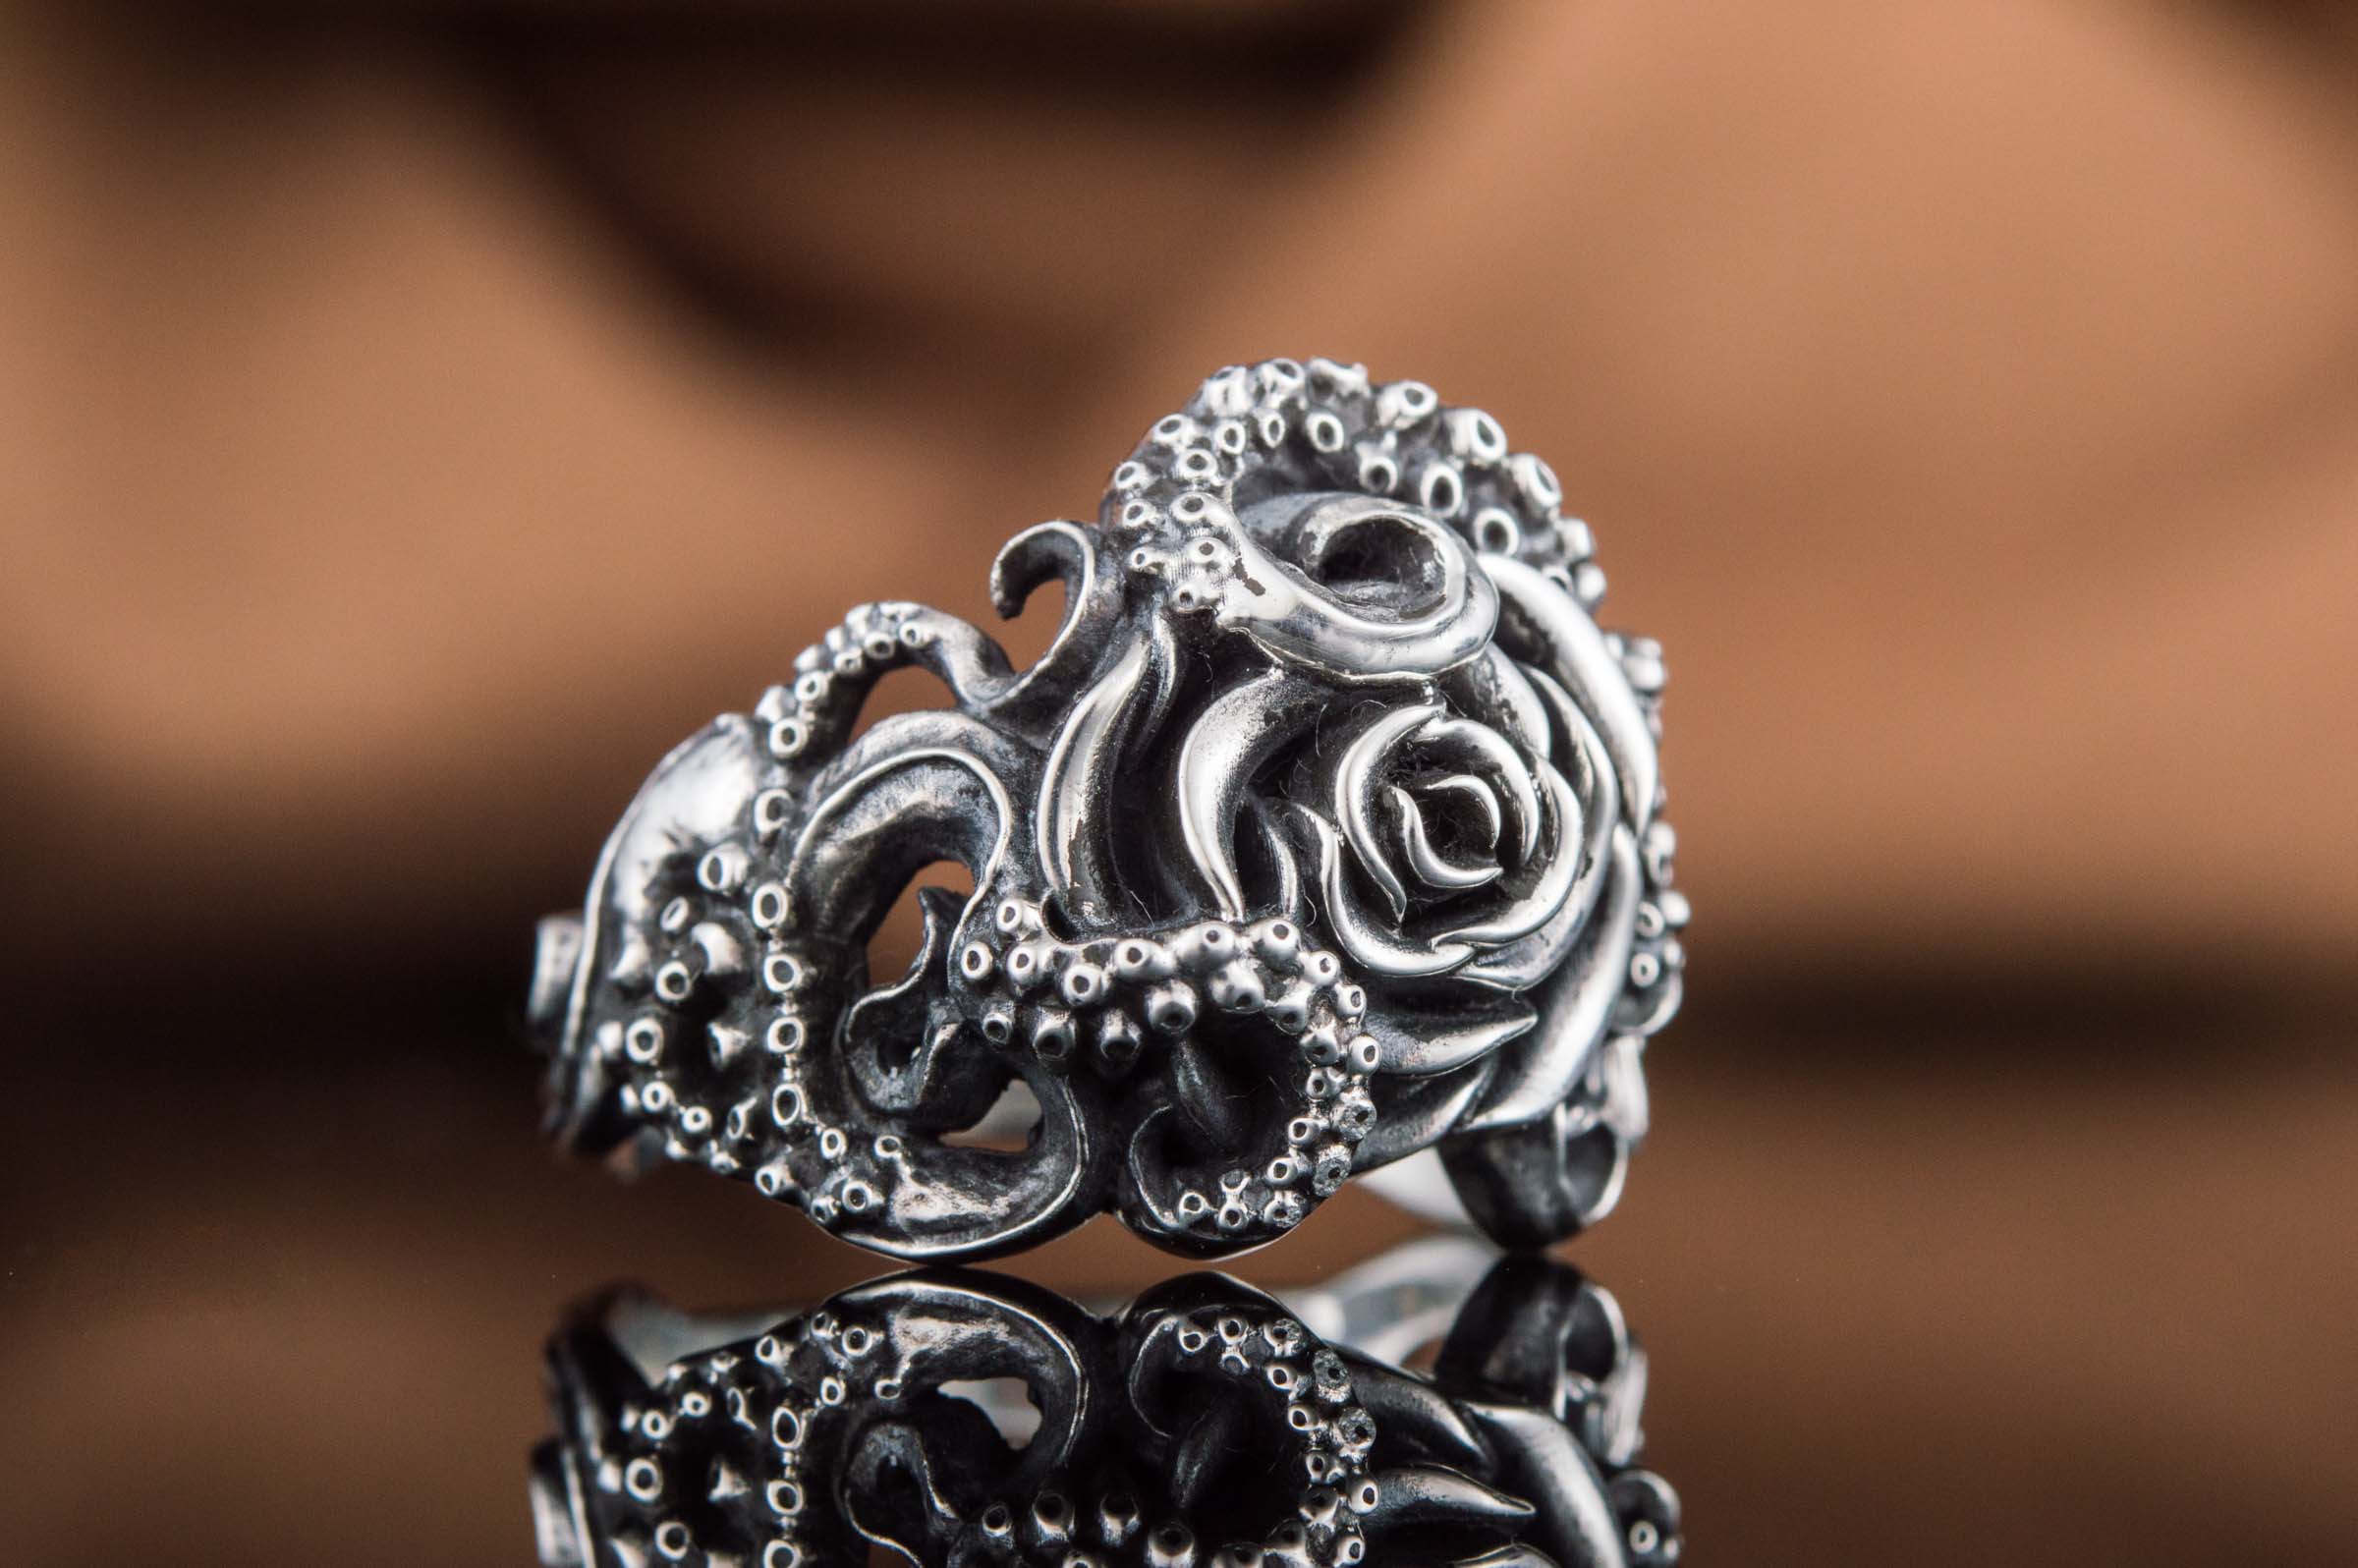 Ring with Octopus and Rose Ornament Sterling Silver Jewelry